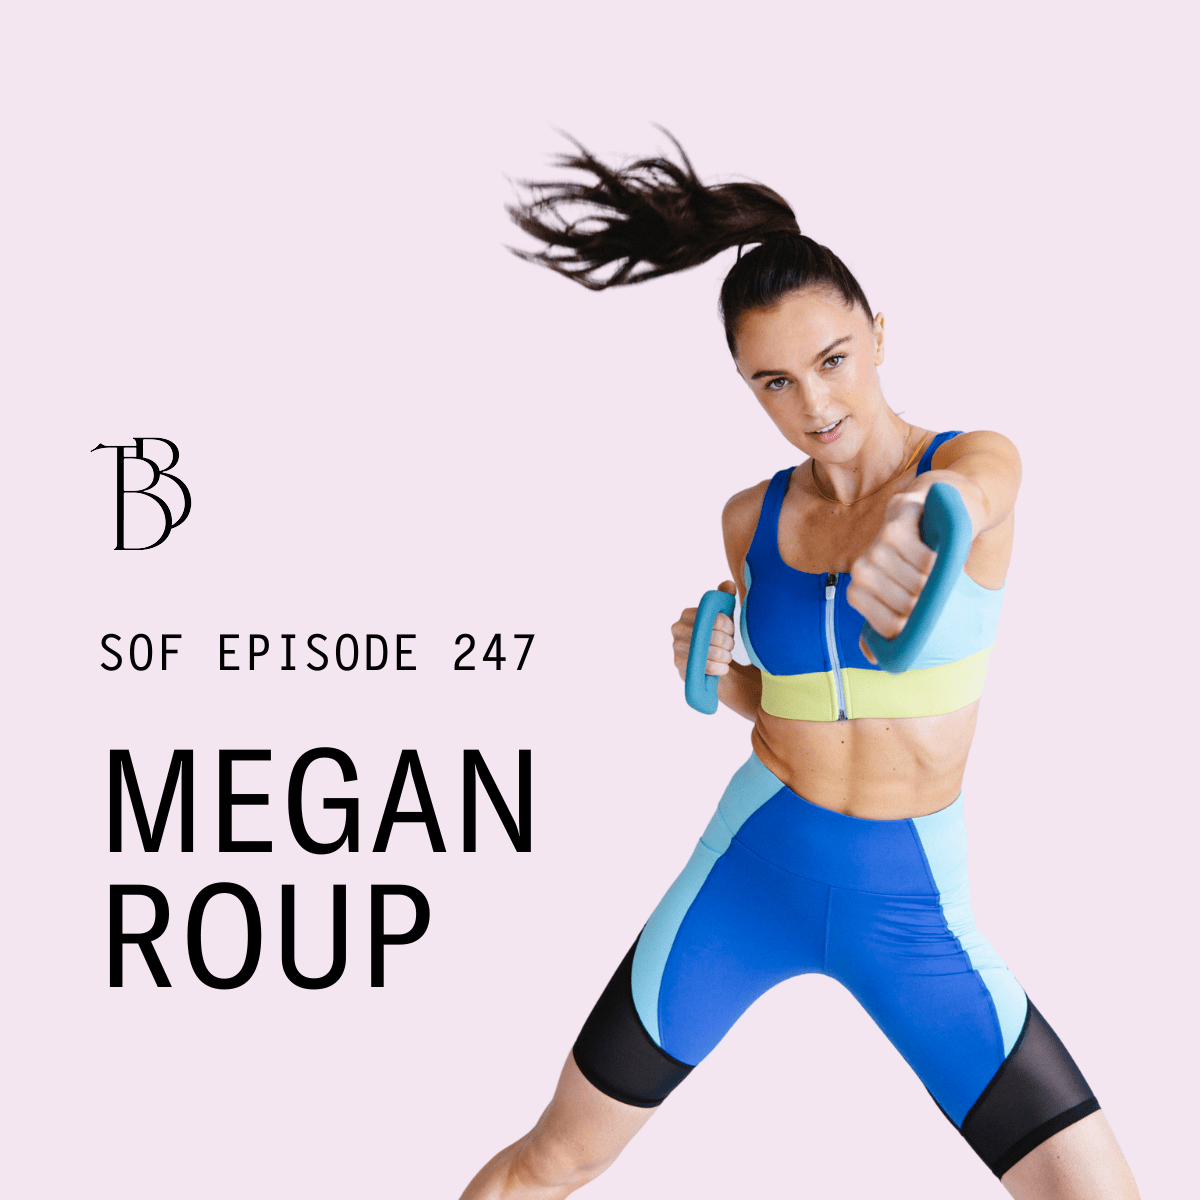 Break a Sweat With Megan Roup's Sculpt Society Workout